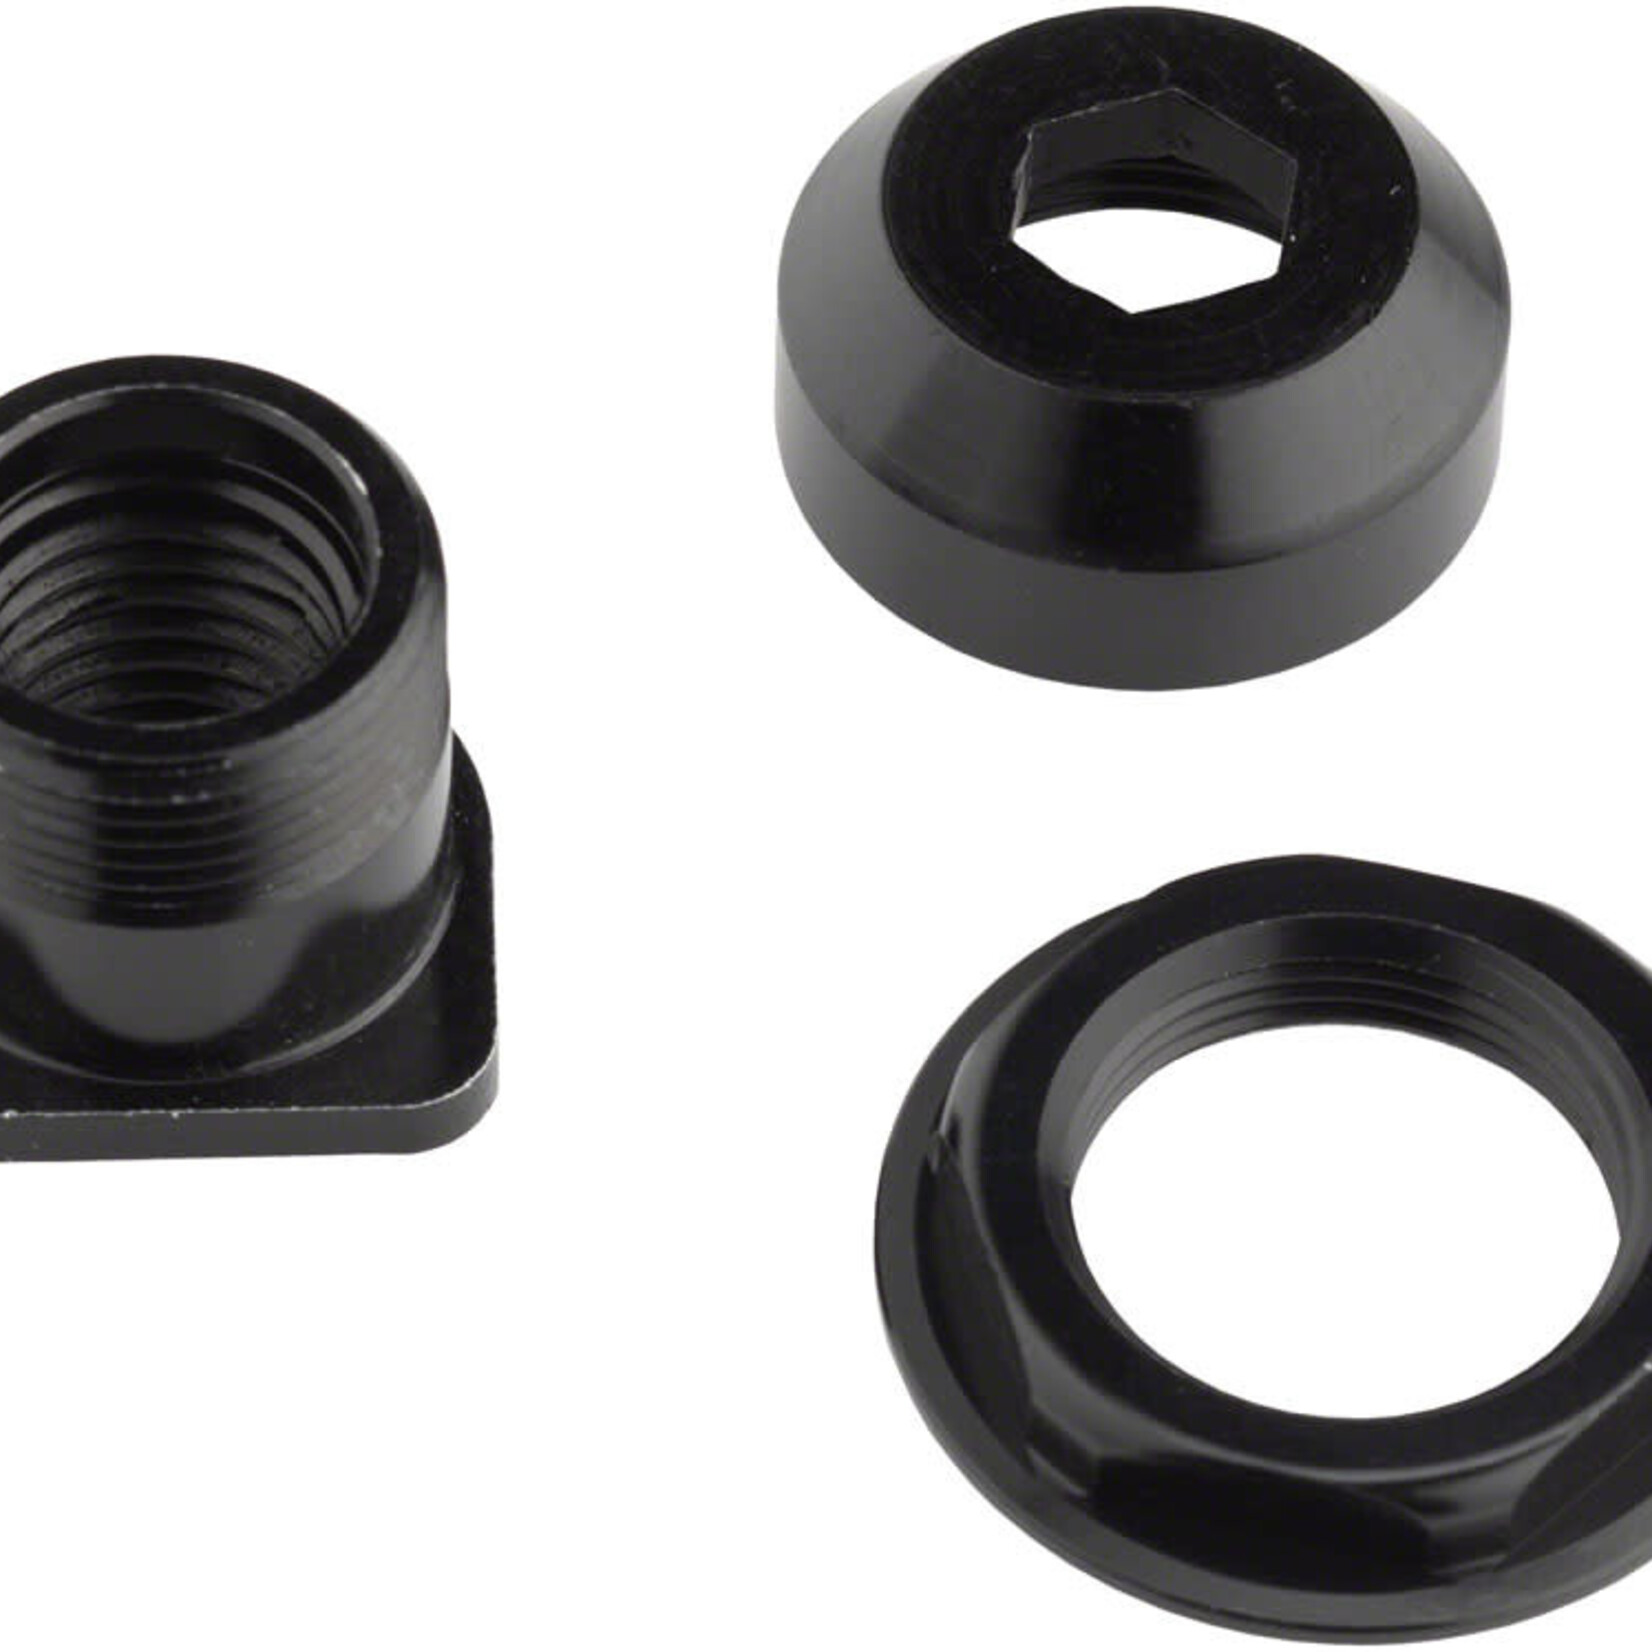 Salsa Salsa Axle Stud Kit for Carbon V2 Beargrease and Warbird Frames